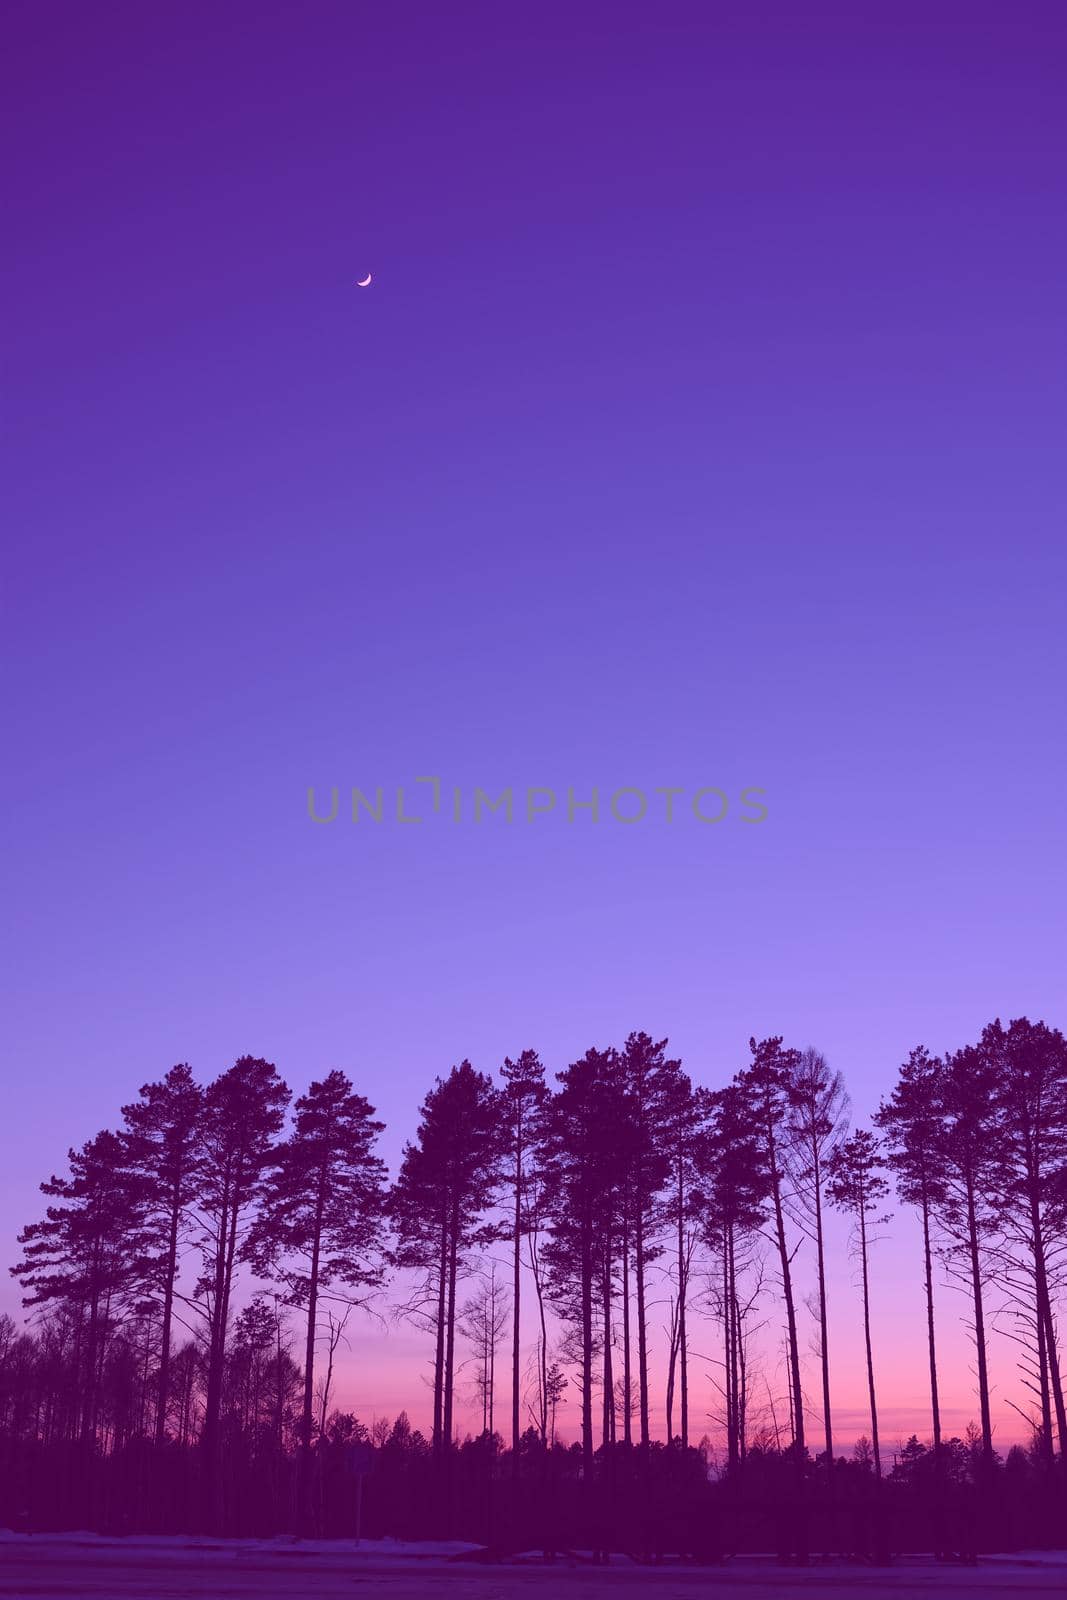 Natural forest horizon with silhouetted trees and thin moon in the evening sky. Evening sunrise and sunset. landscape wallpaper. Illustration style. Colorful look background velvet purple. Silhouette of trees at colorful sunset